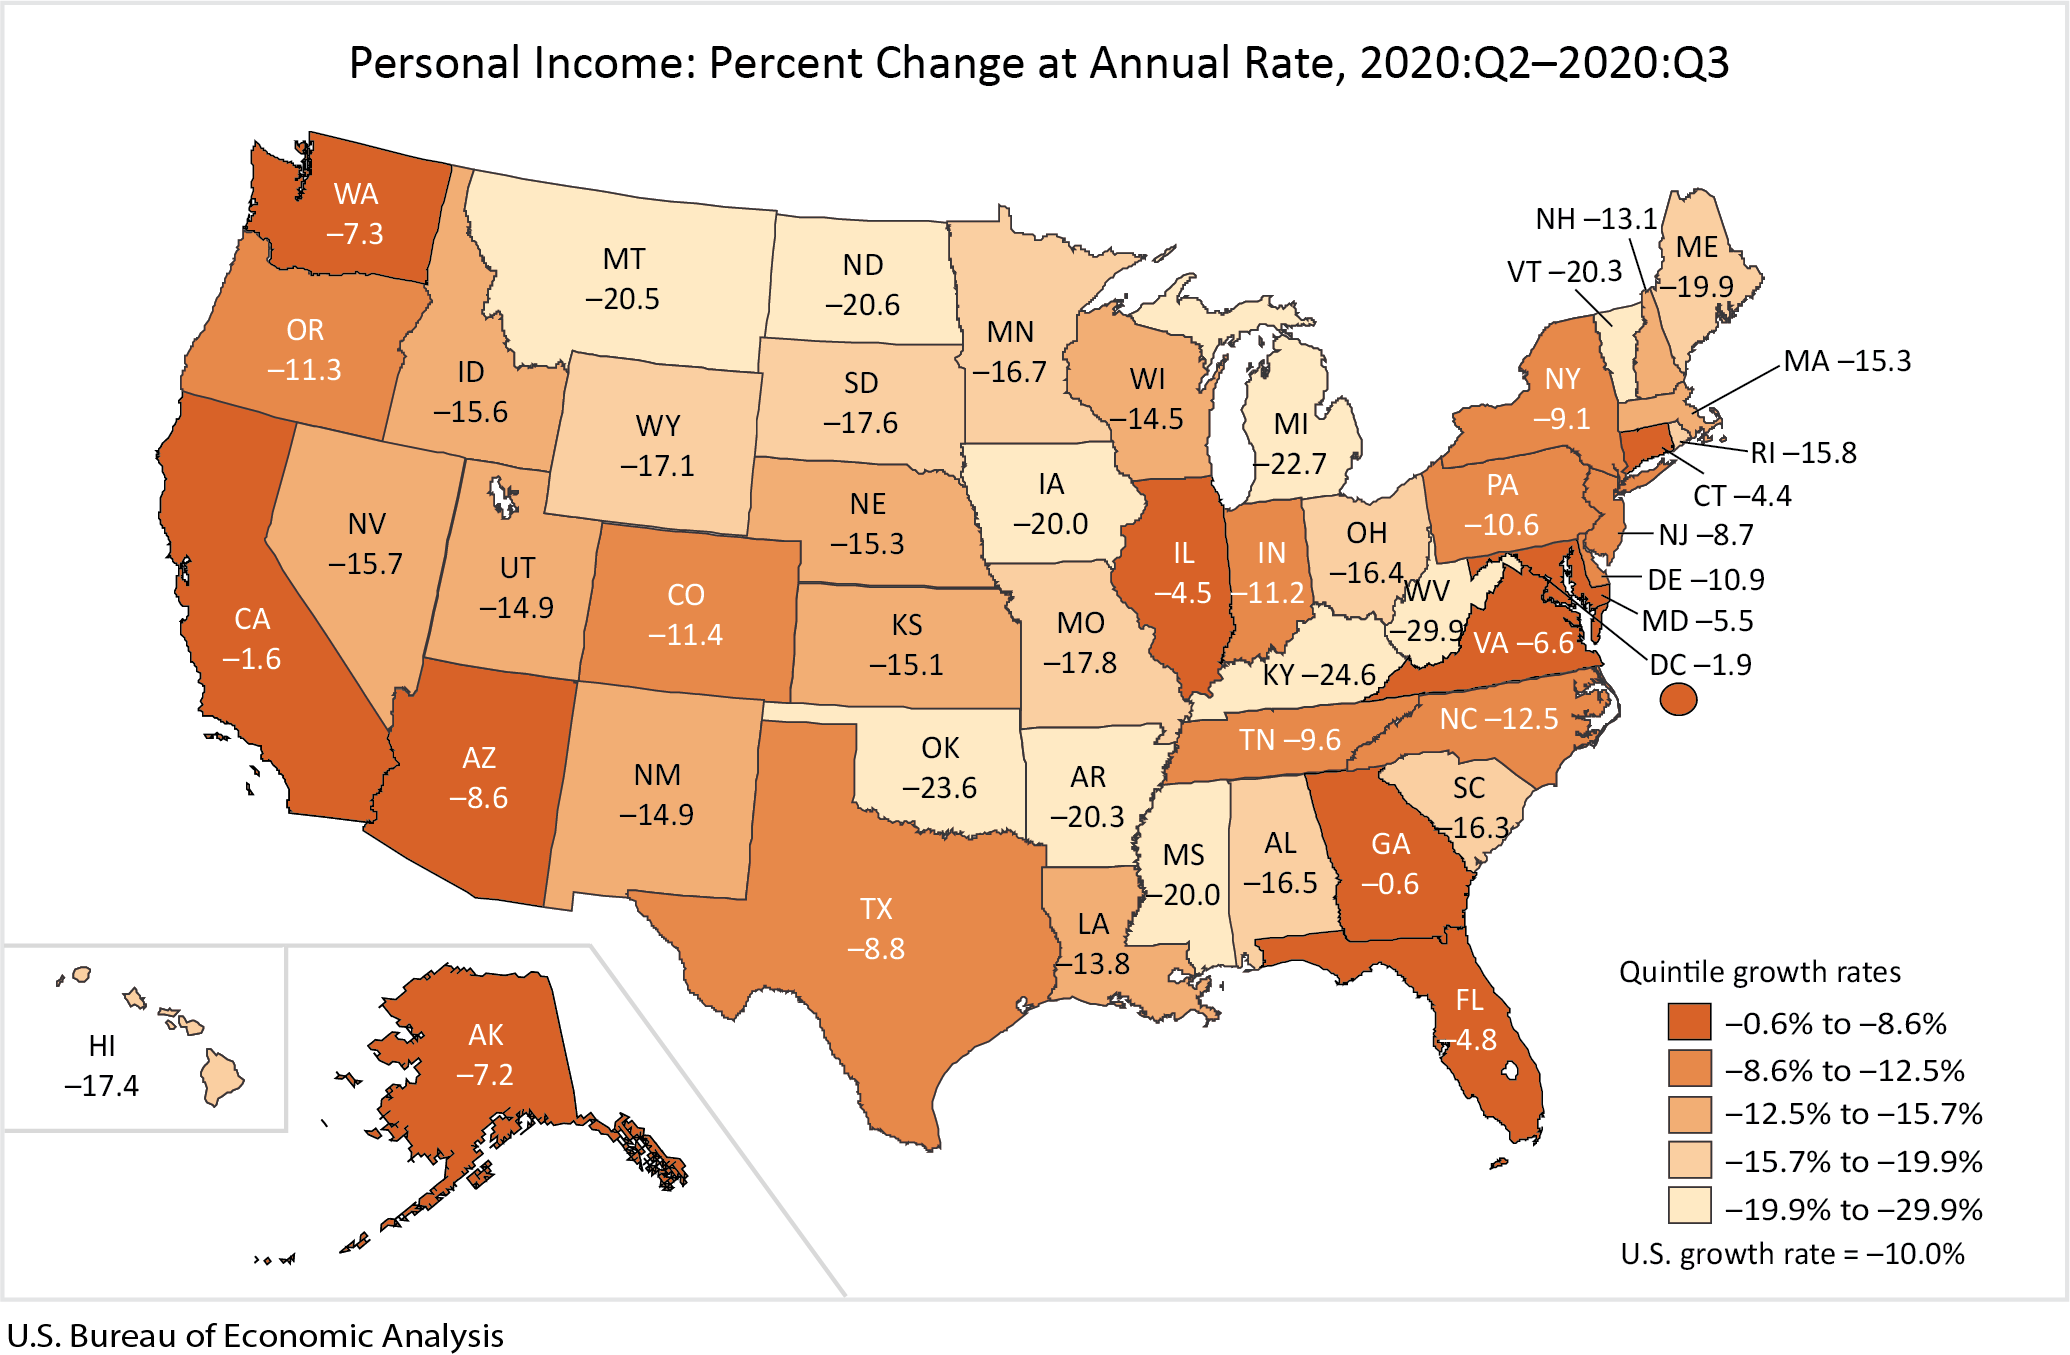 Personal Income: Percent Change at Annual Rate, 2020:Q2-2020-Q3  